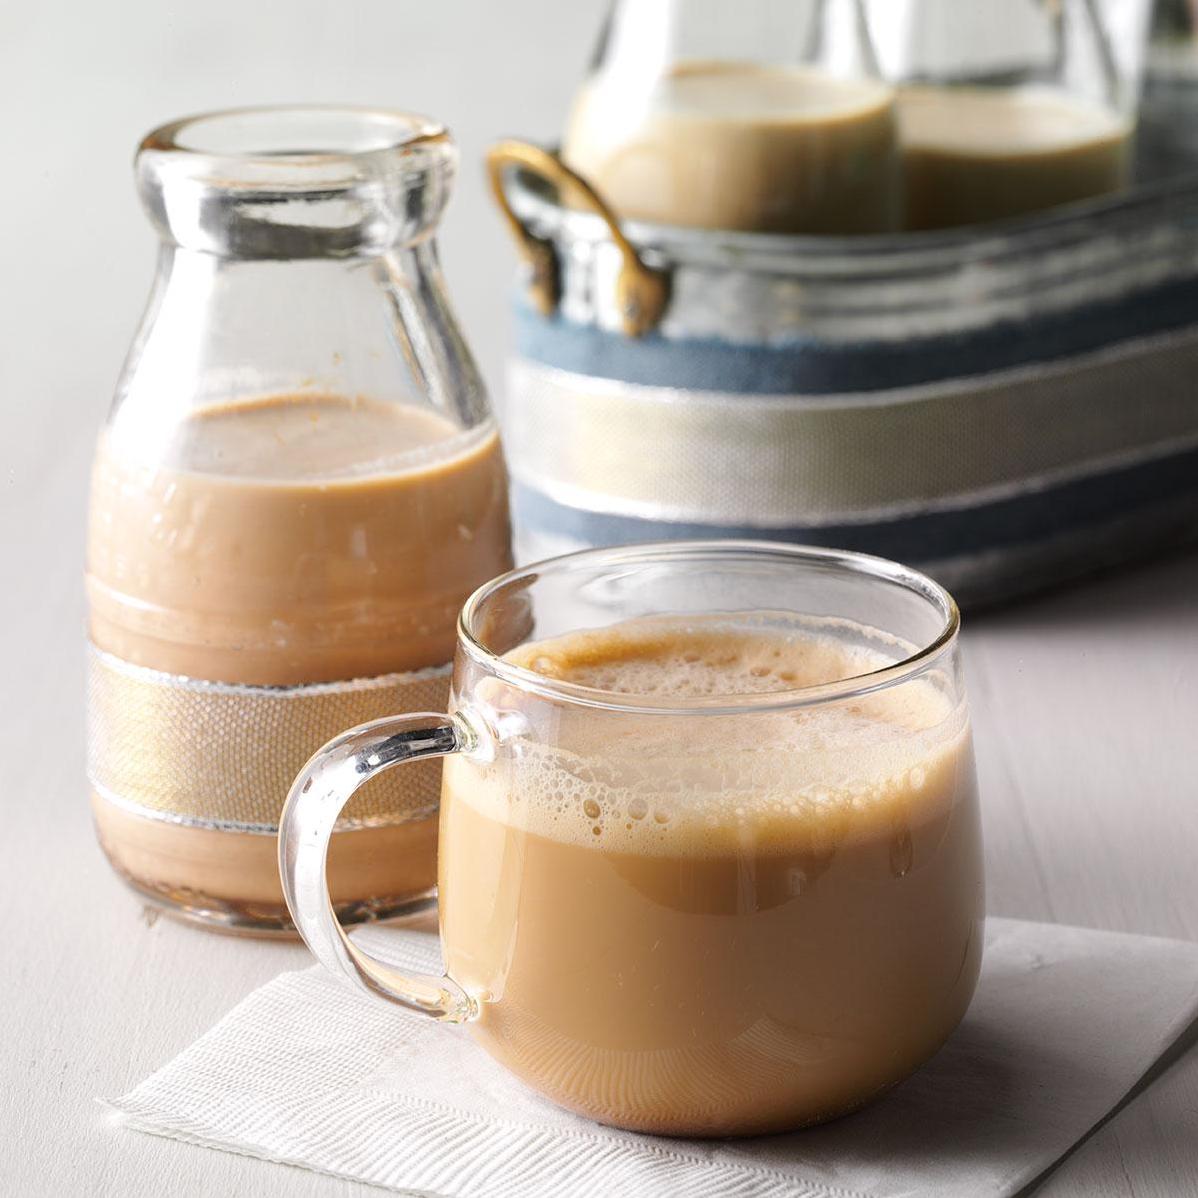  Irish Cream is not just for St. Patrick's Day, it's a year-round delight.